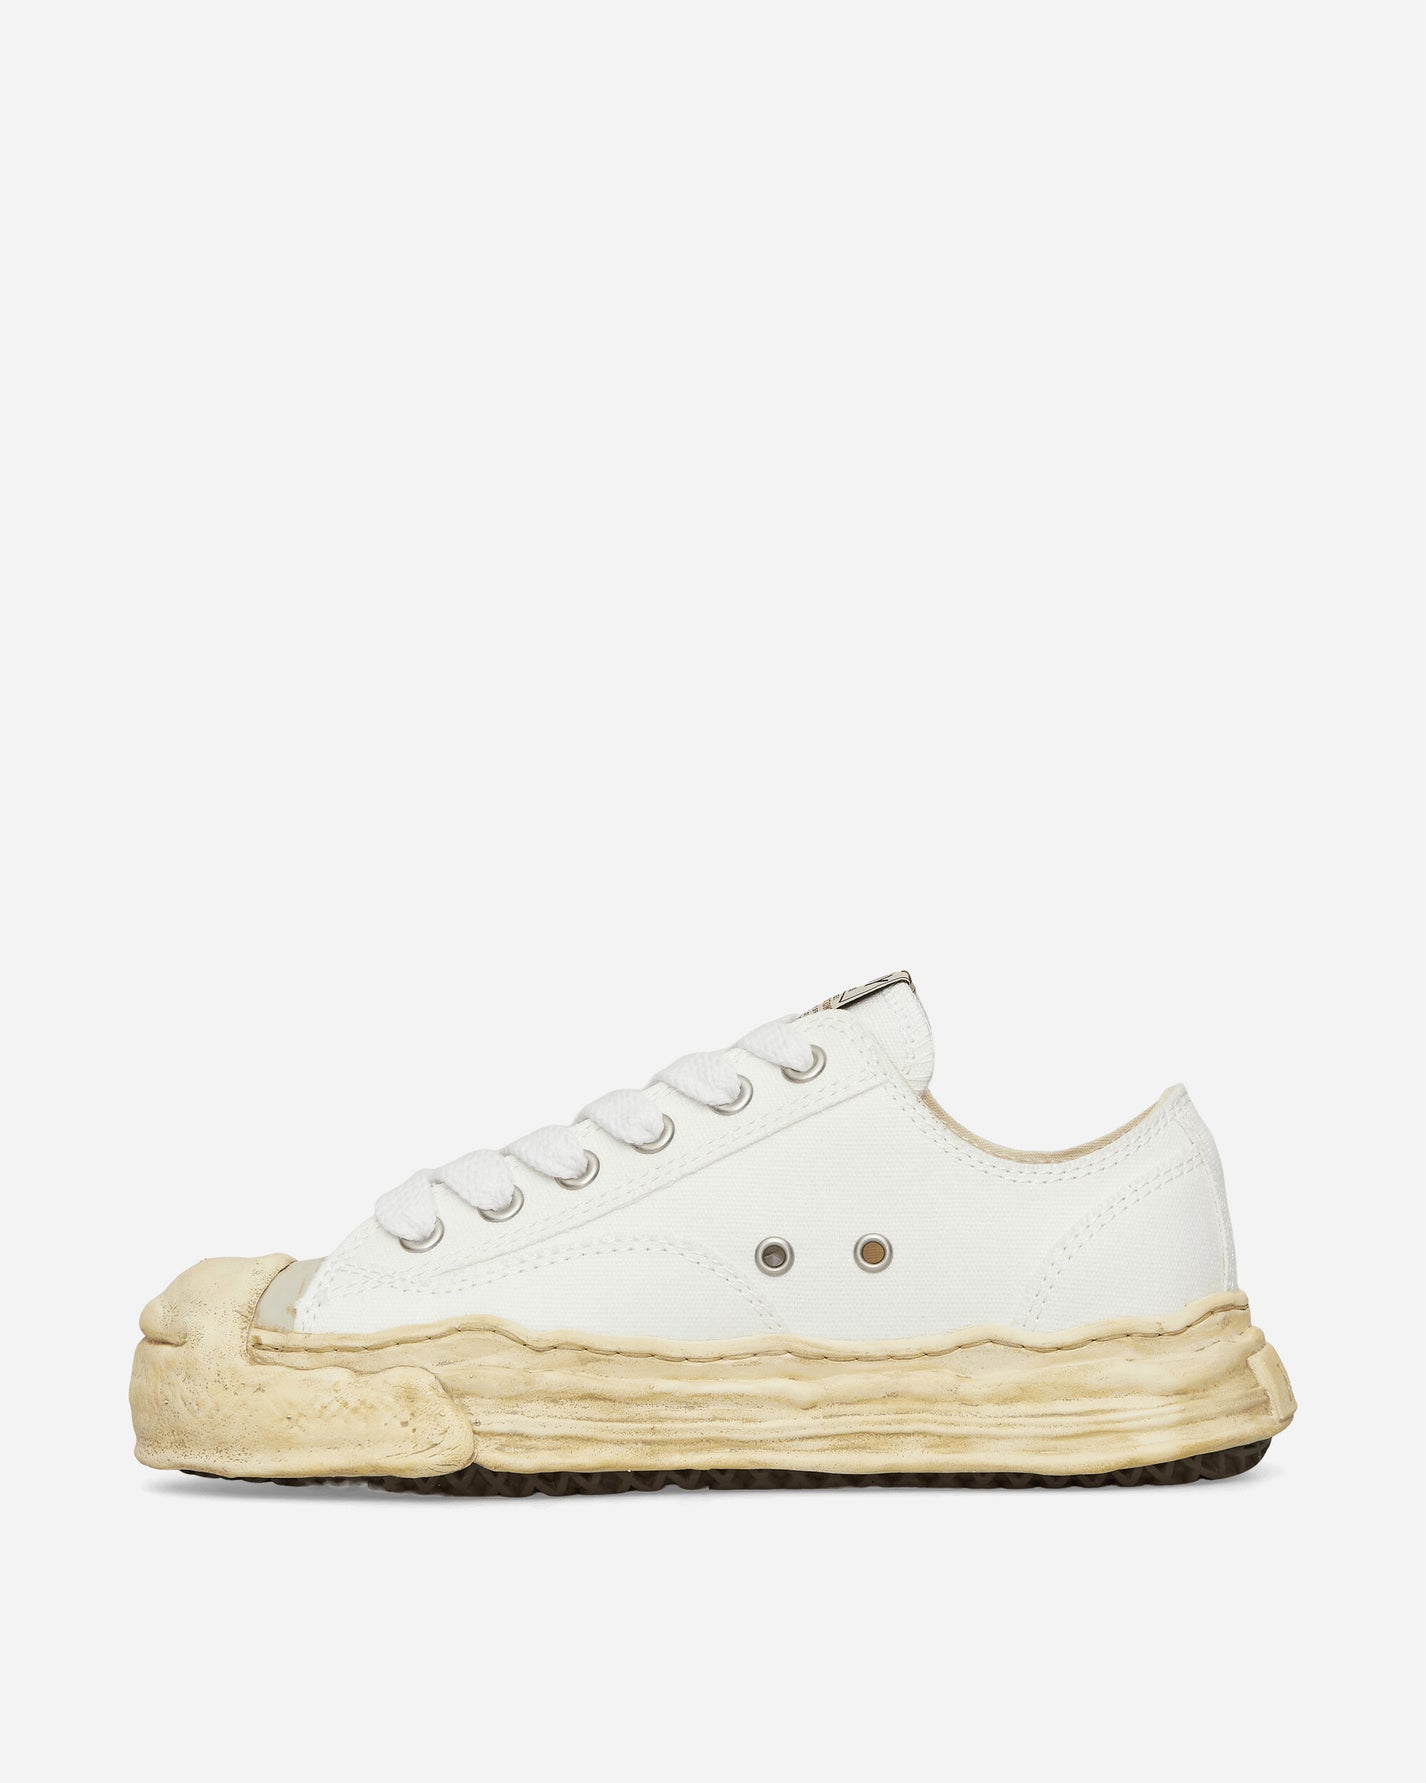 Maison MIHARA YASUHIRO Hank / Original Sole Garment Dyed Canvas Low-Top White Sneakers Low A13FW733 WHITE